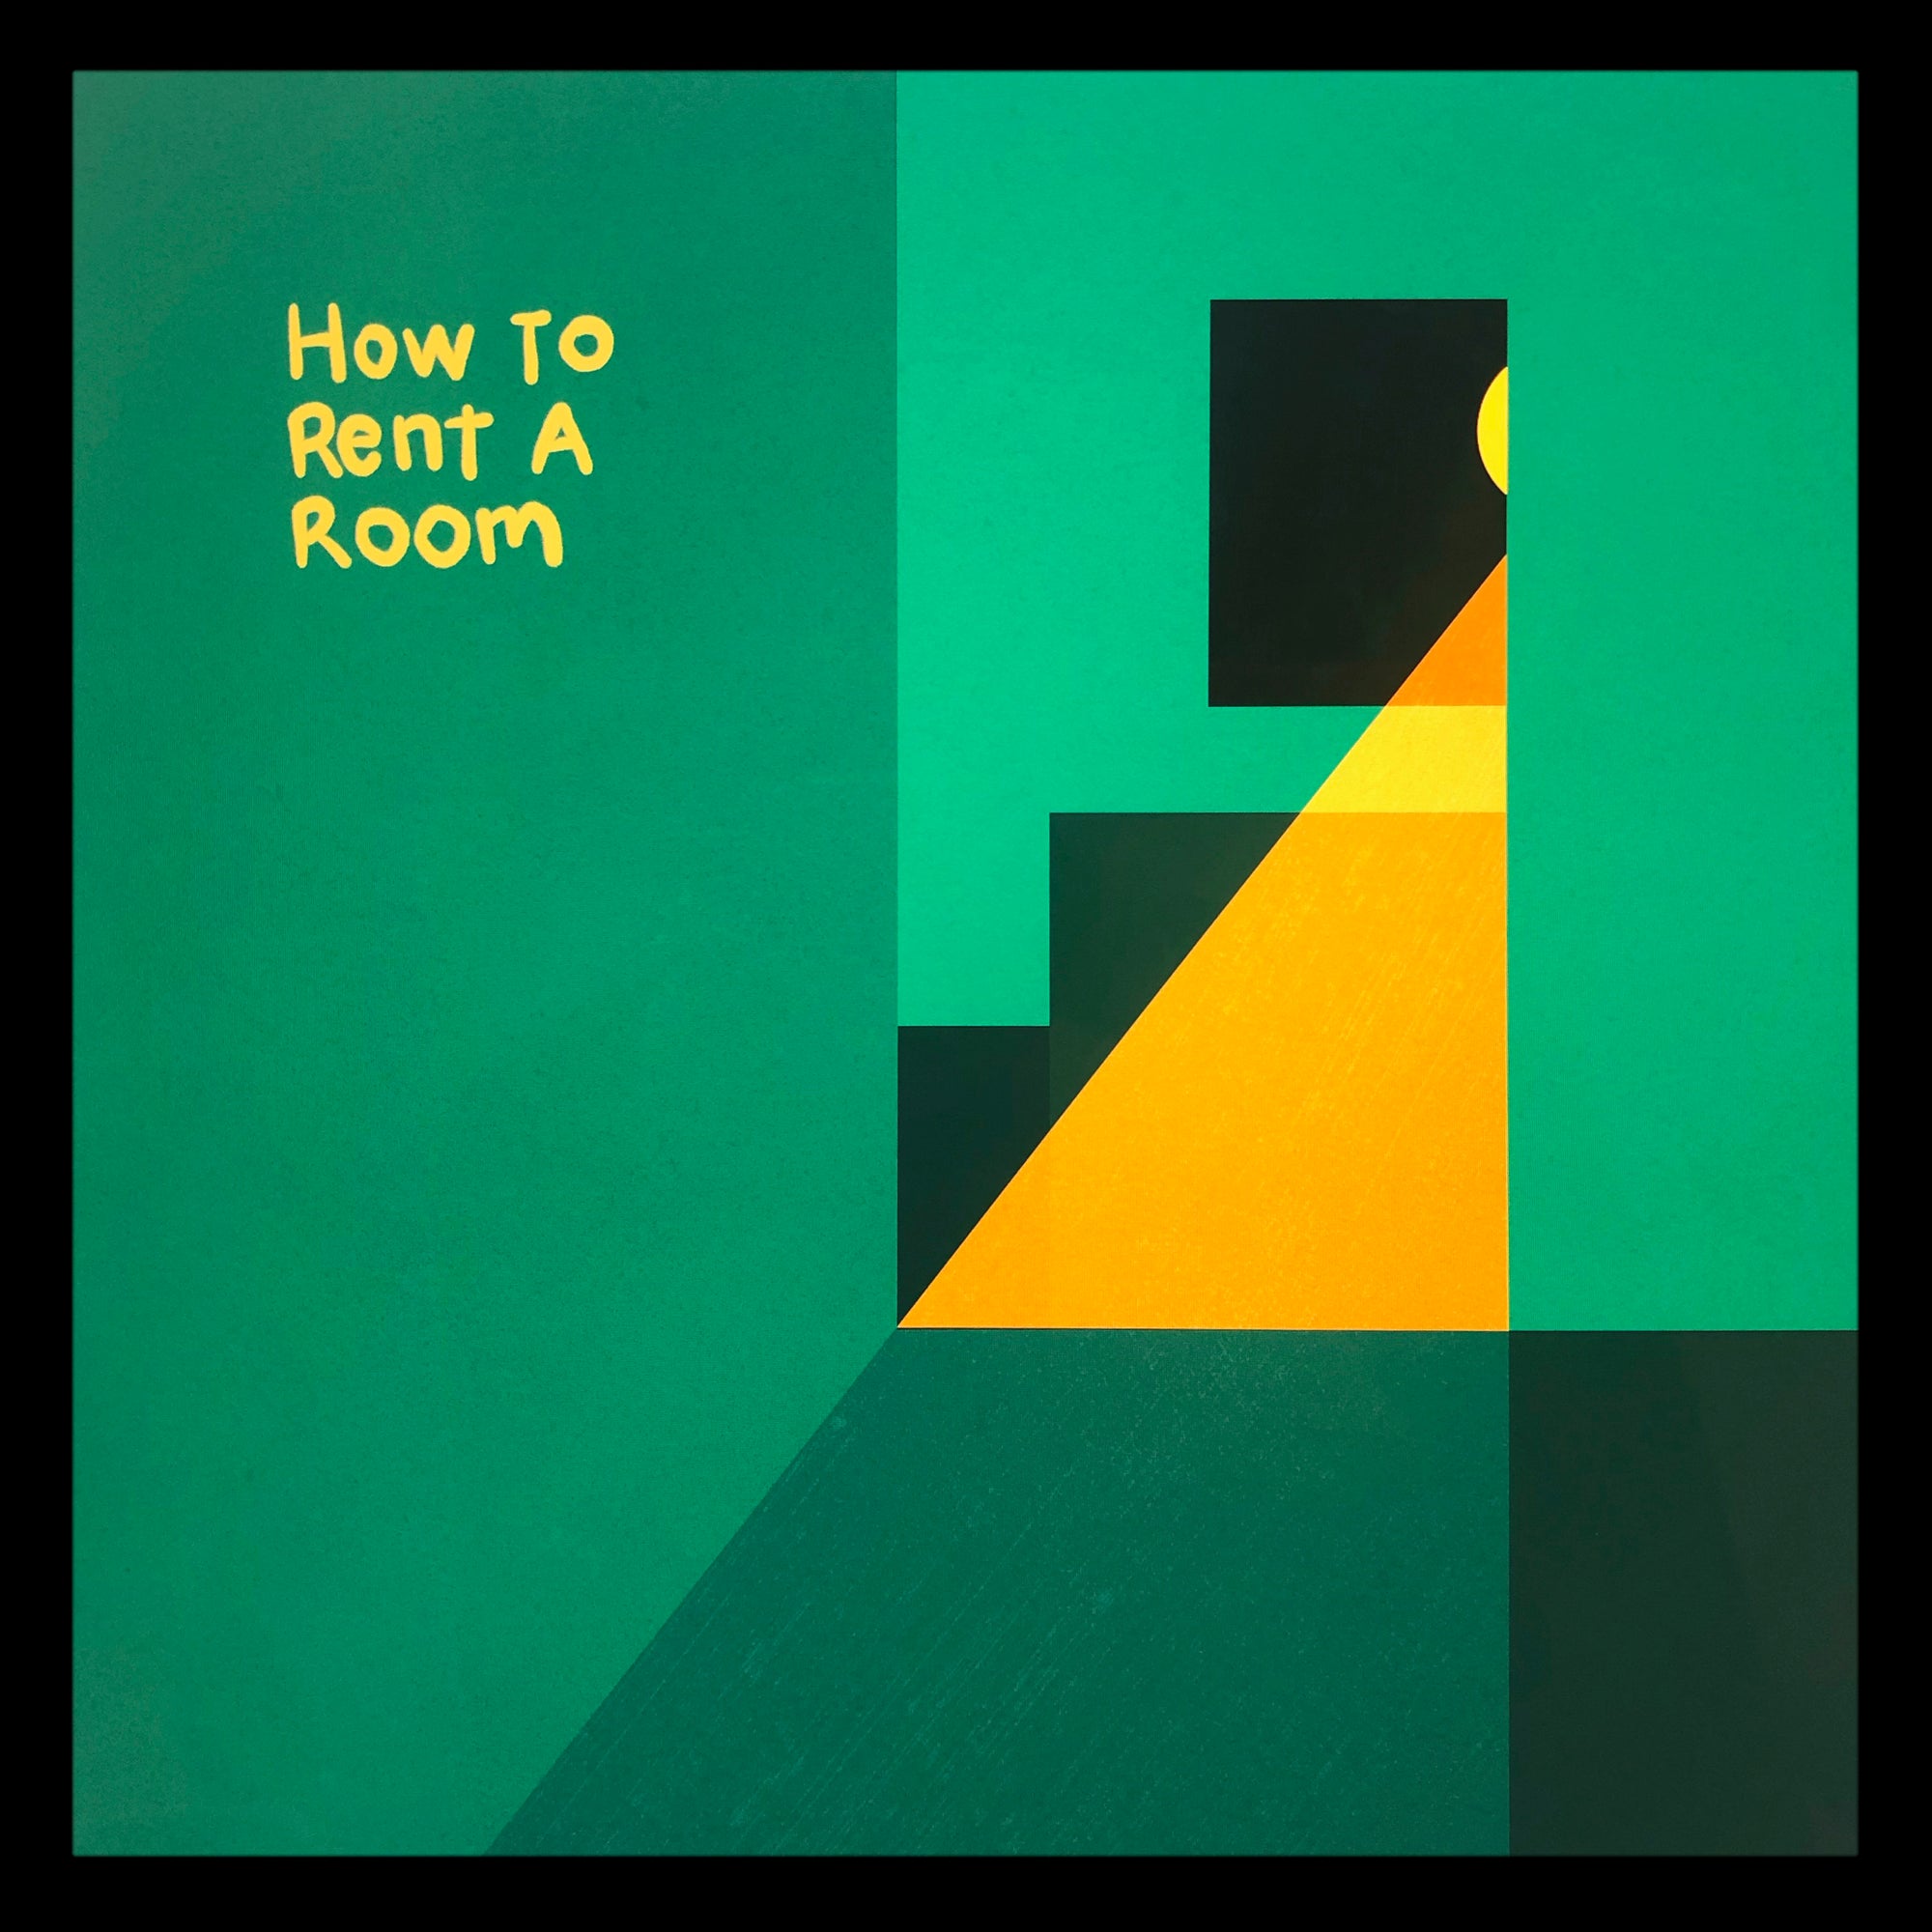 How to Rent a Room